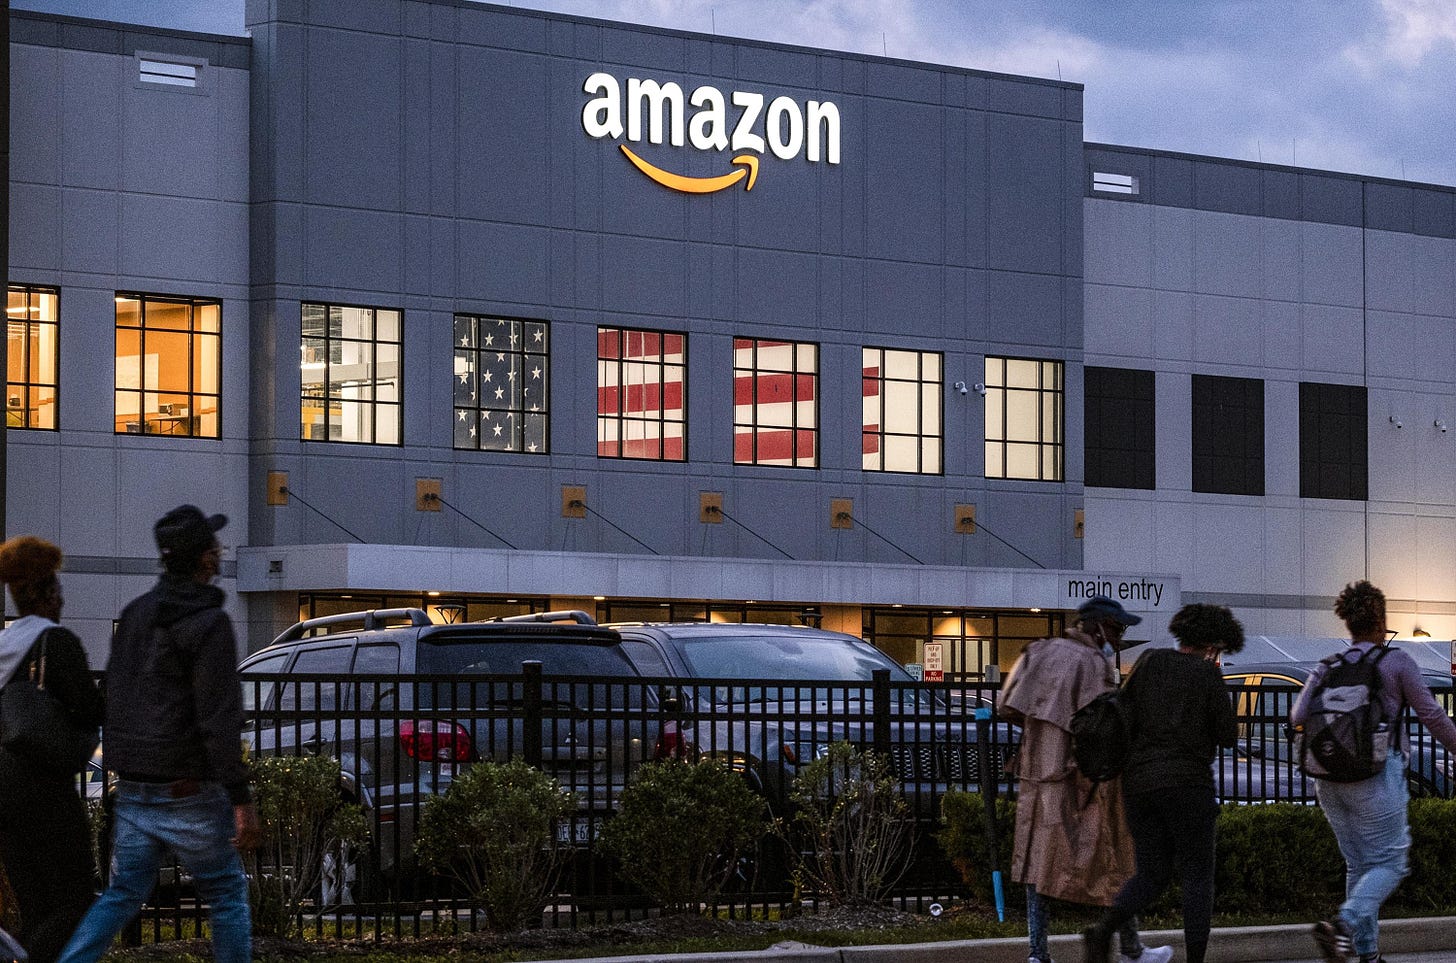 Amazon union could face a tough road ahead after victory | AP News